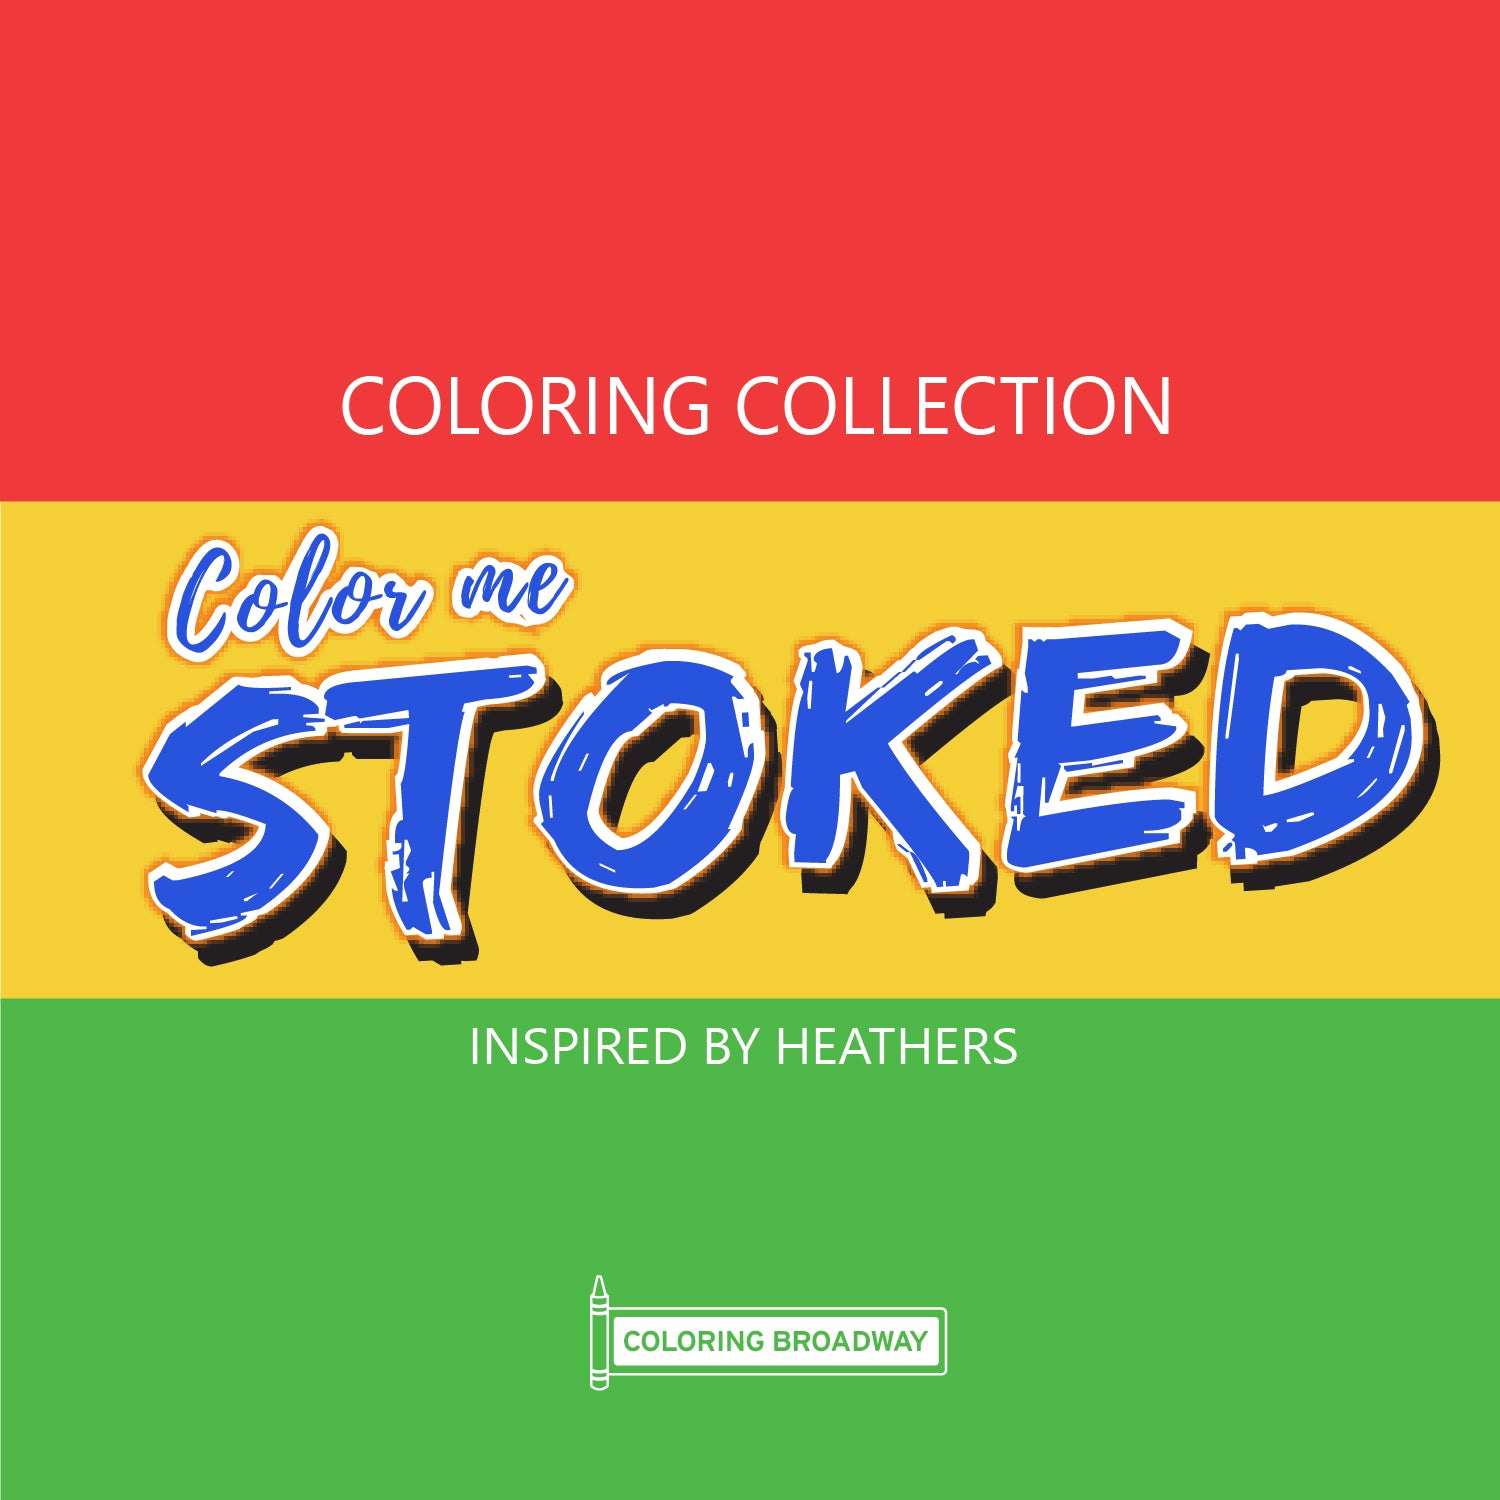  Coloring Broadway HEATHERS, “Color Me Stoked” Collection